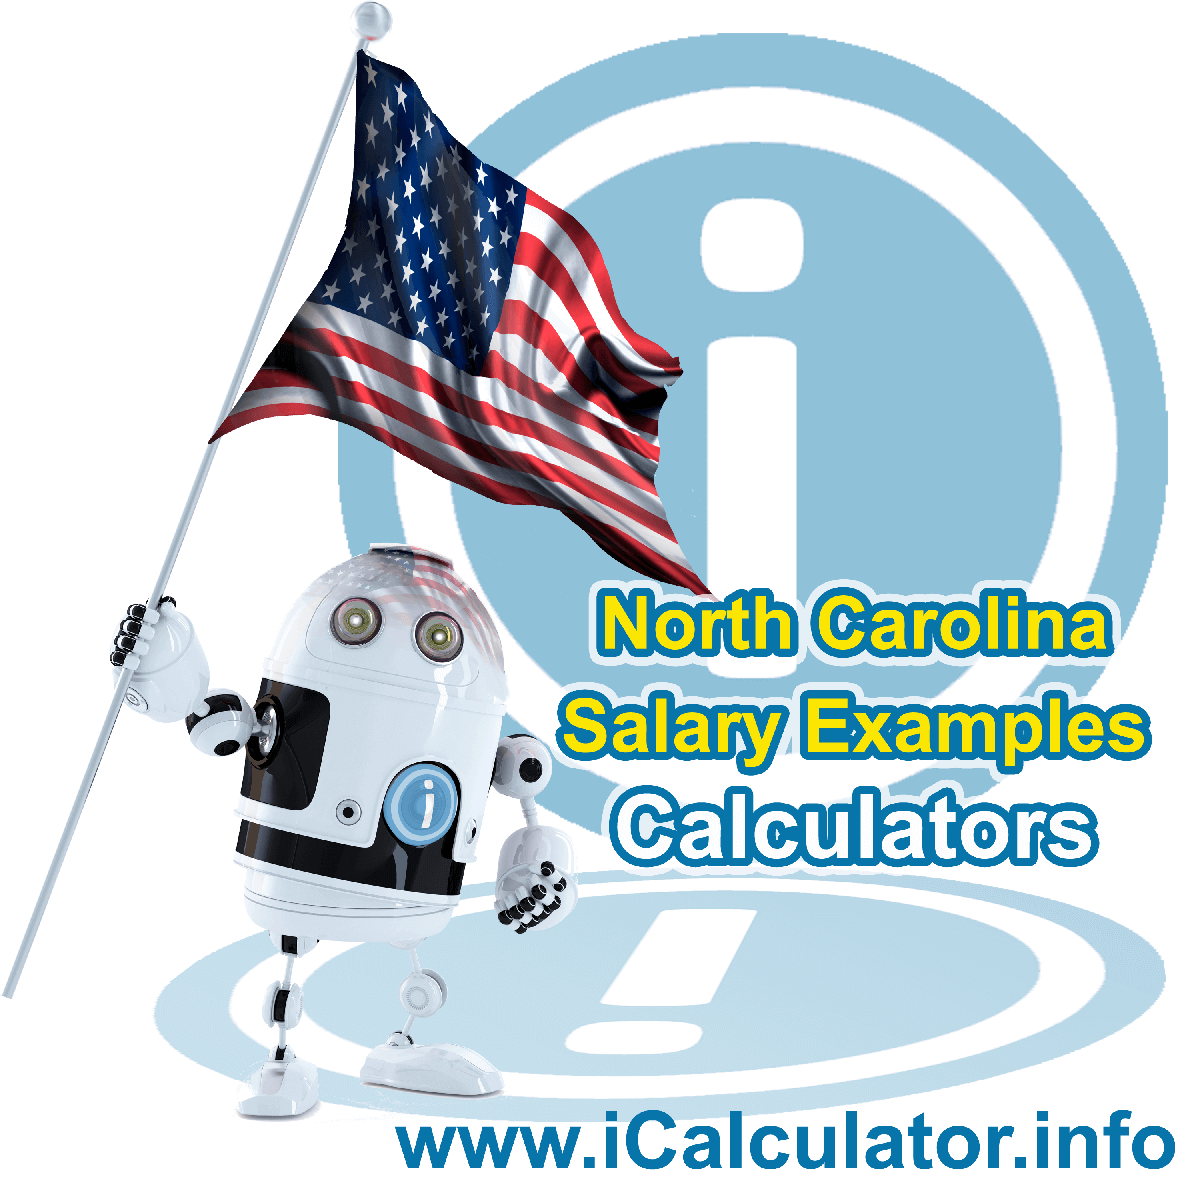 North Carolina Salary Example for $ 135,000.00 in 2023 | iCalculator™ | $ 135,000.00 salary example for employee and employer paying North Carolina State tincome taxes. Detailed salary after tax calculation including North Carolina State Tax, Federal State Tax, Medicare Deductions, Social Security, Capital Gains and other income tax and salary deductions complete with supporting North Carolina state tax tables 